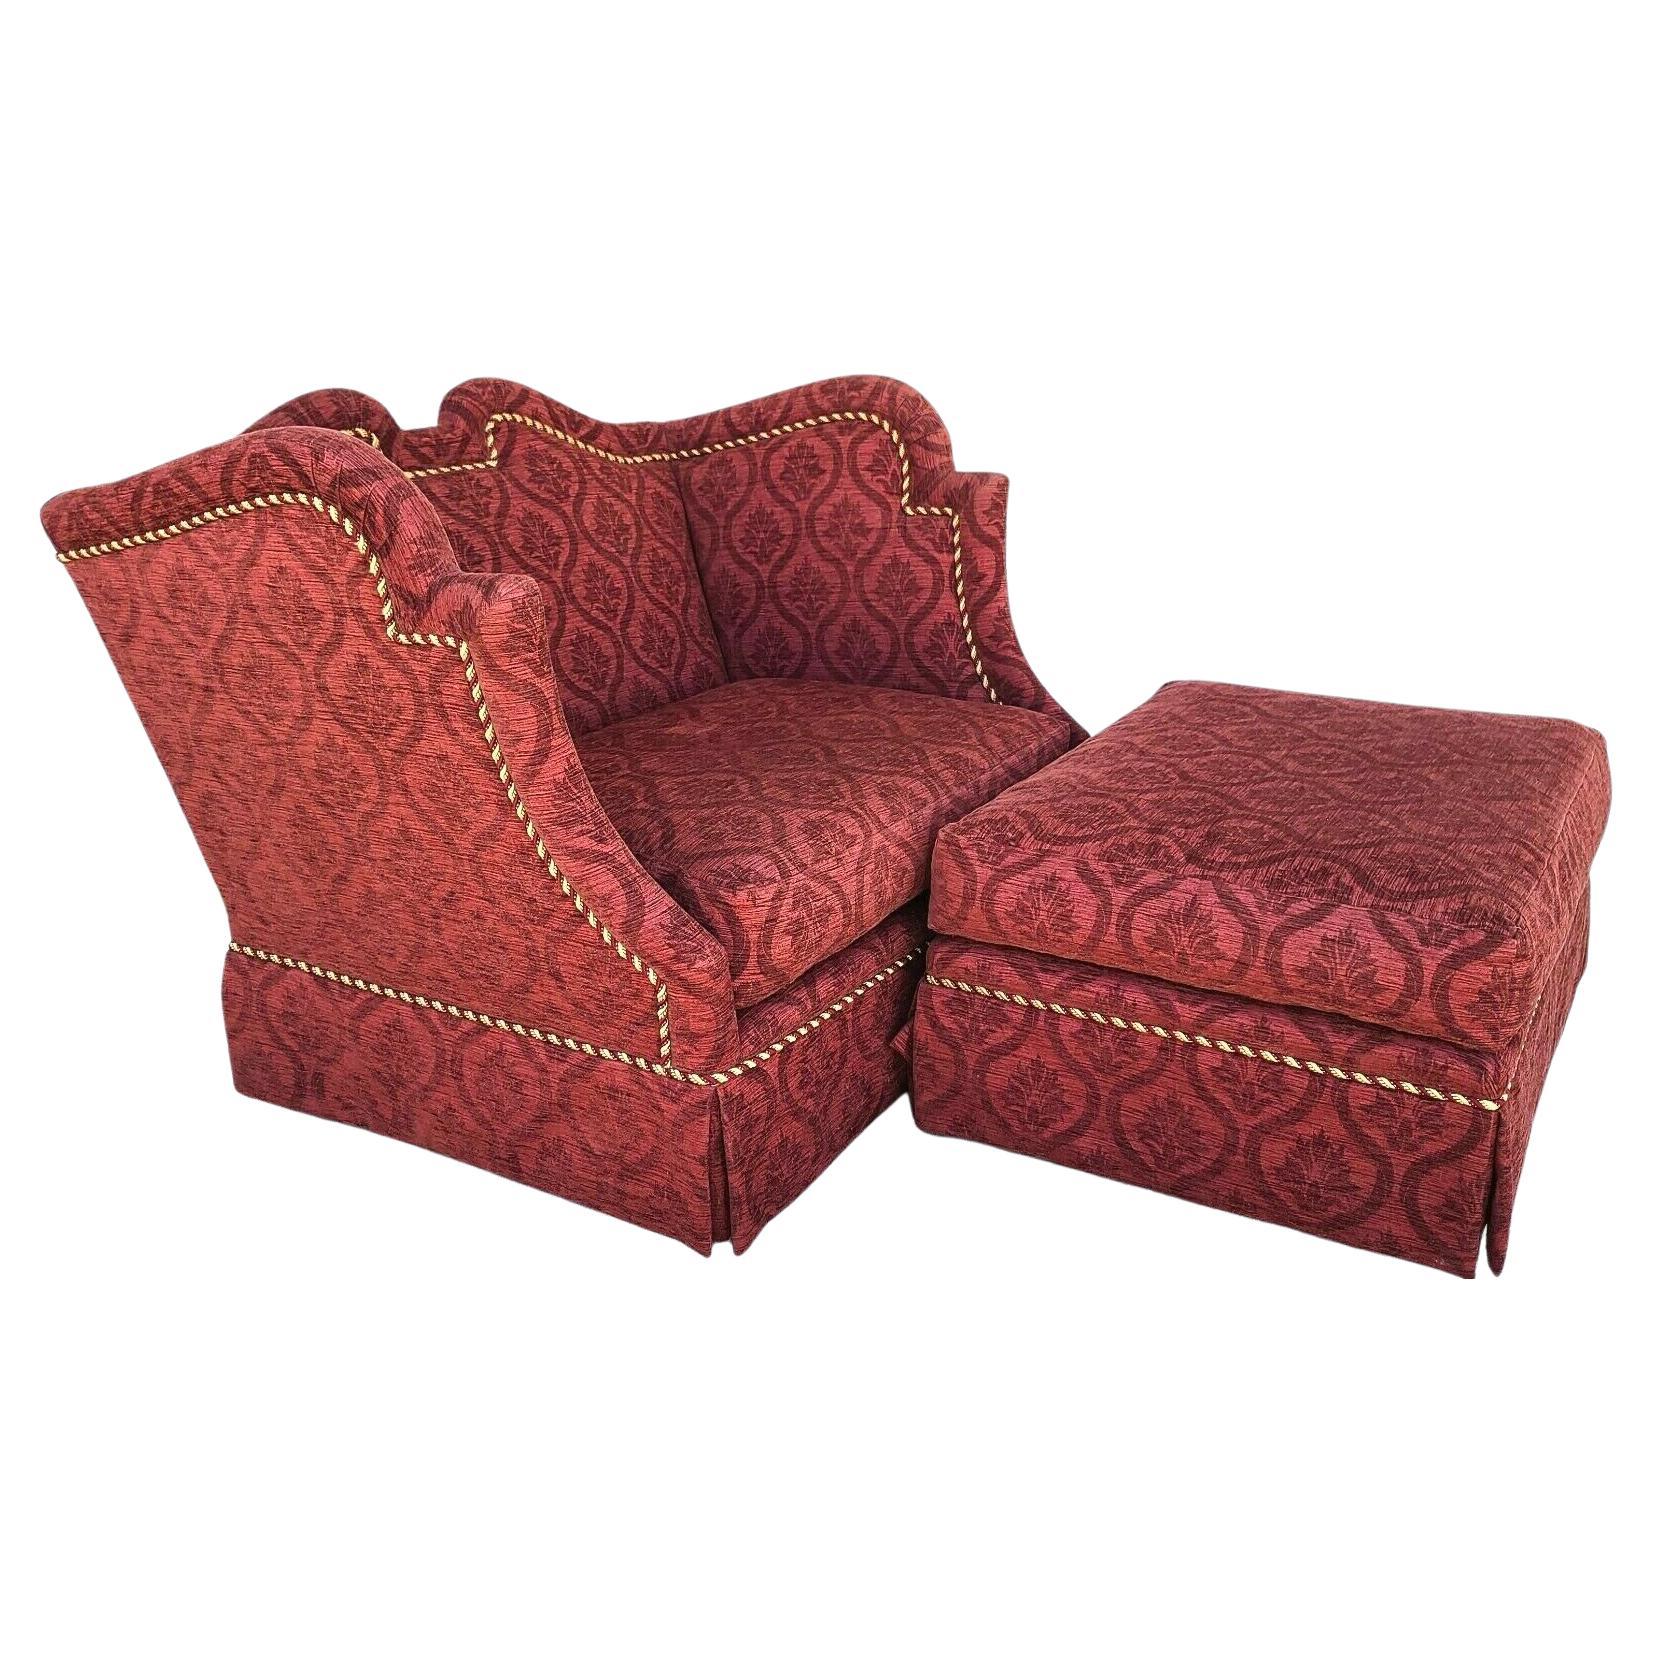 Do chairs and ottomans have to match?